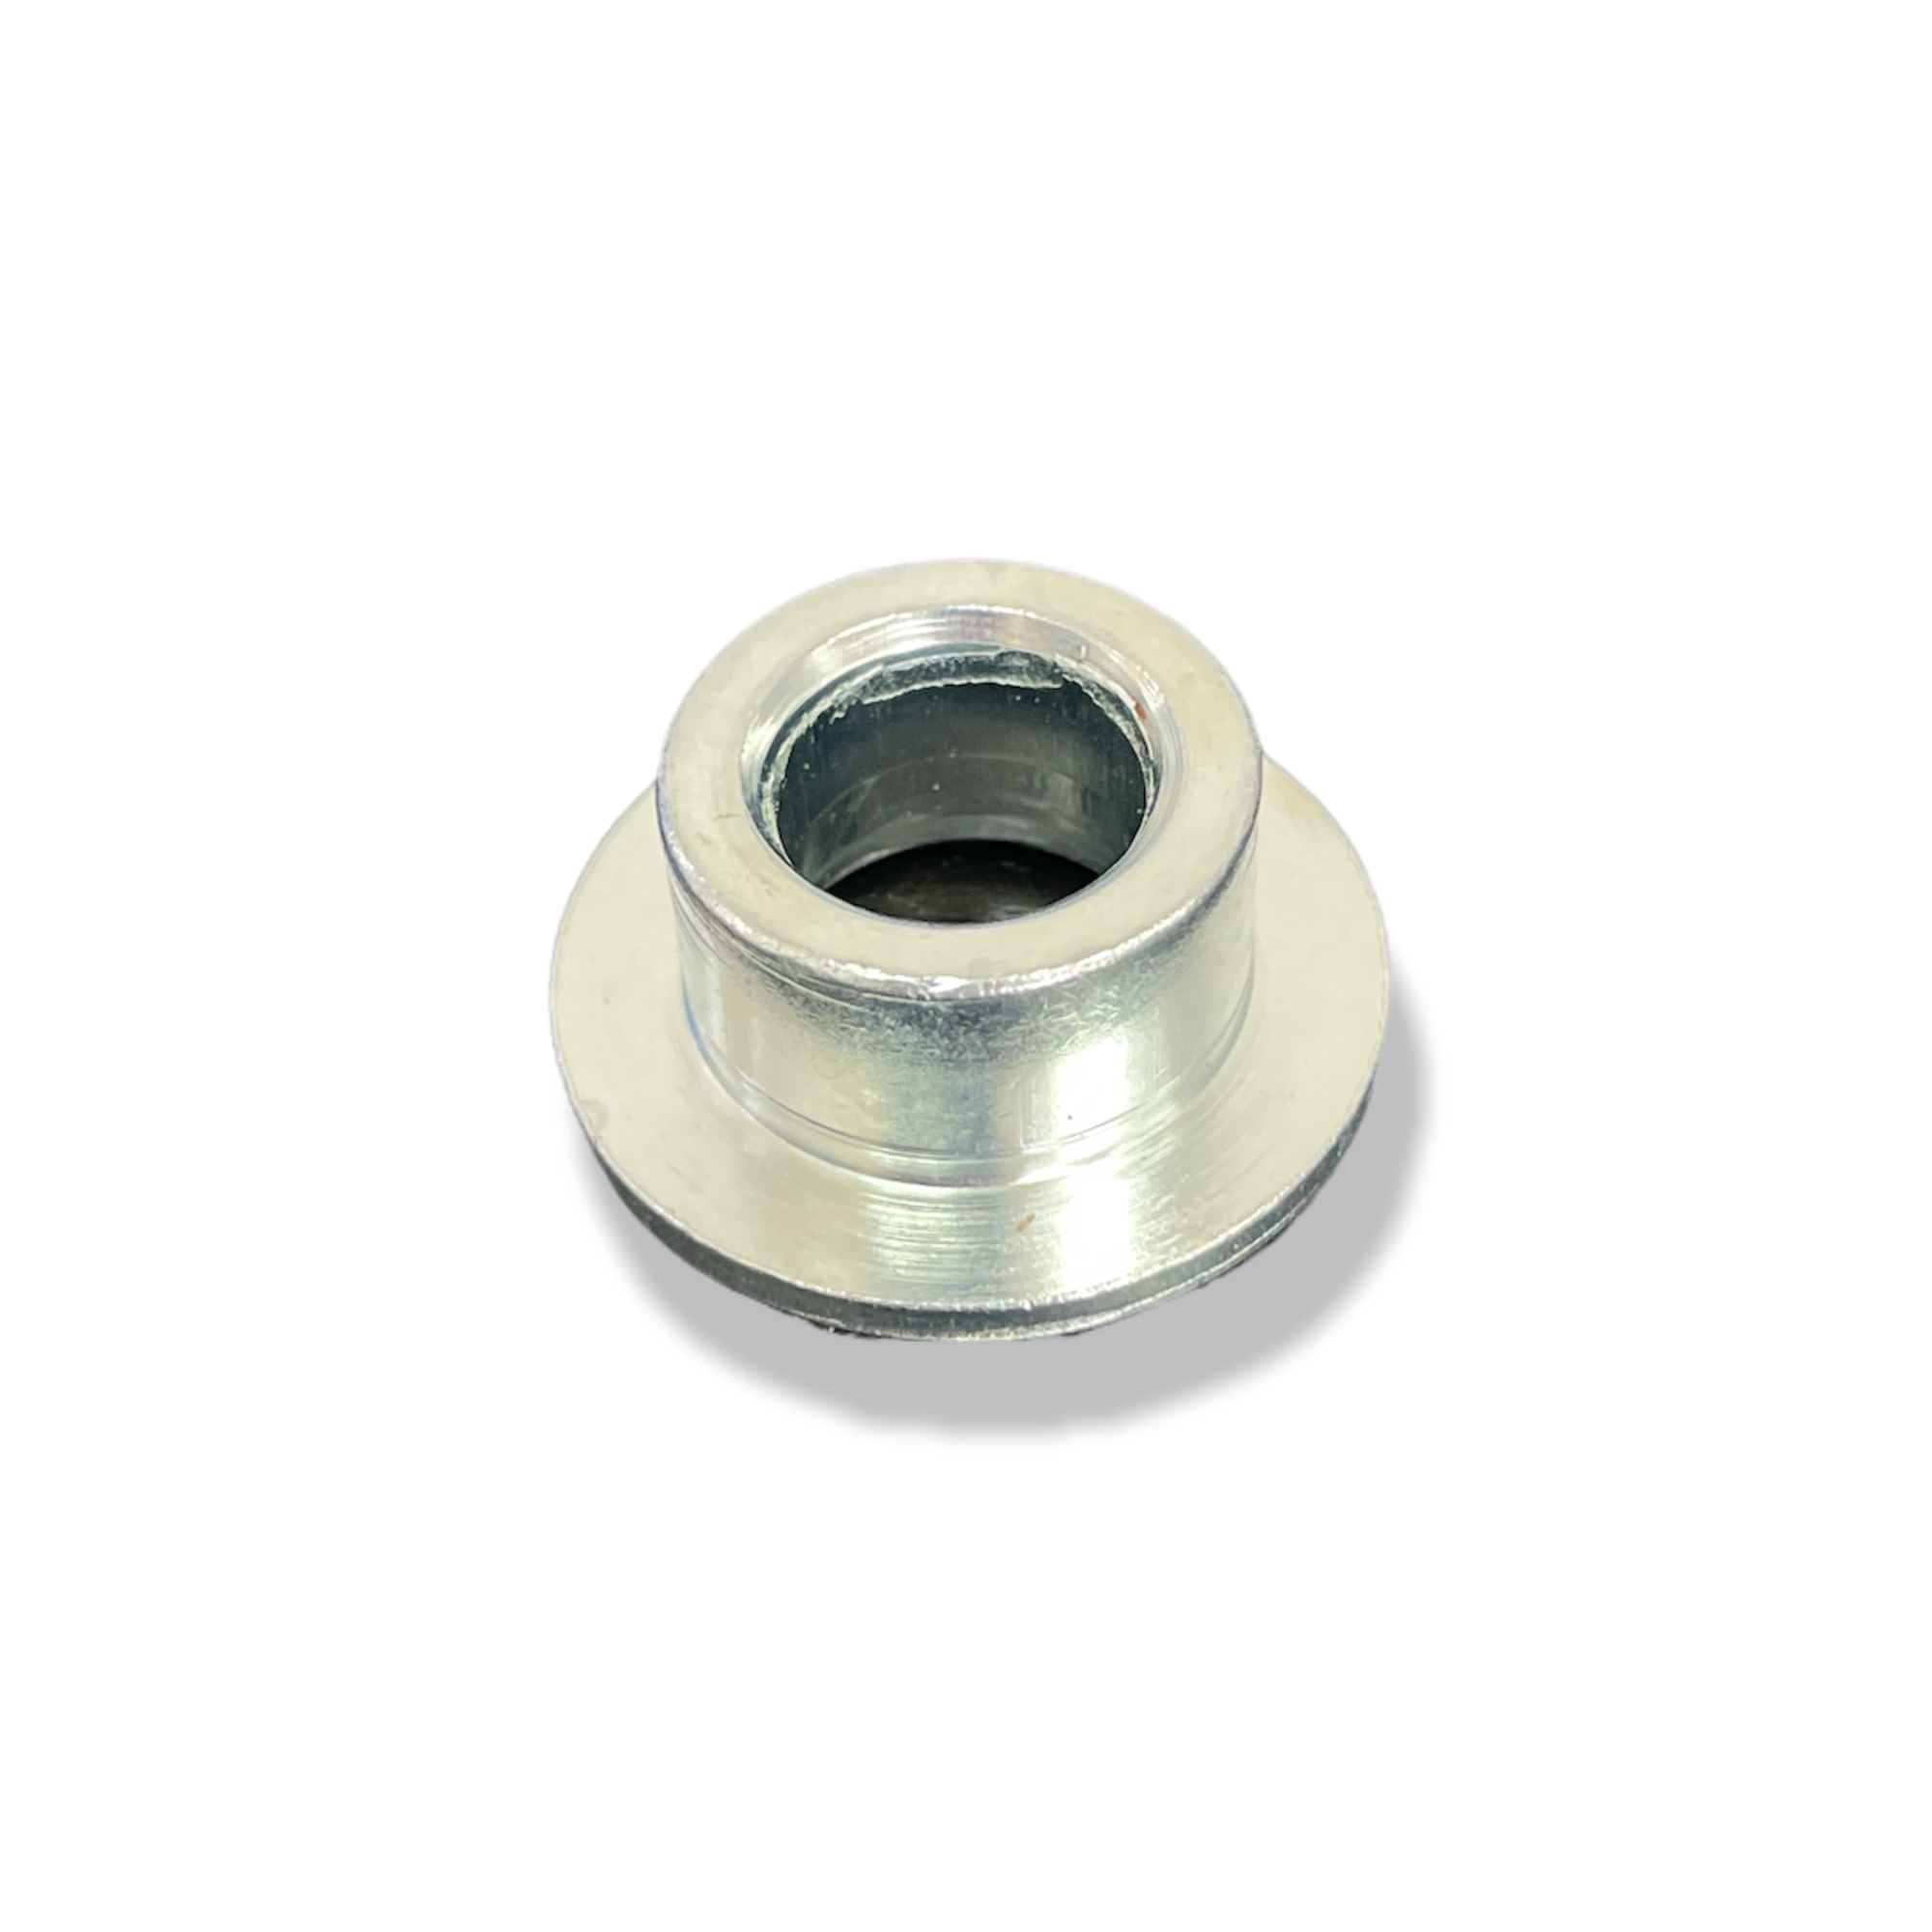 STEP BUSHING MIDDLE AXEL